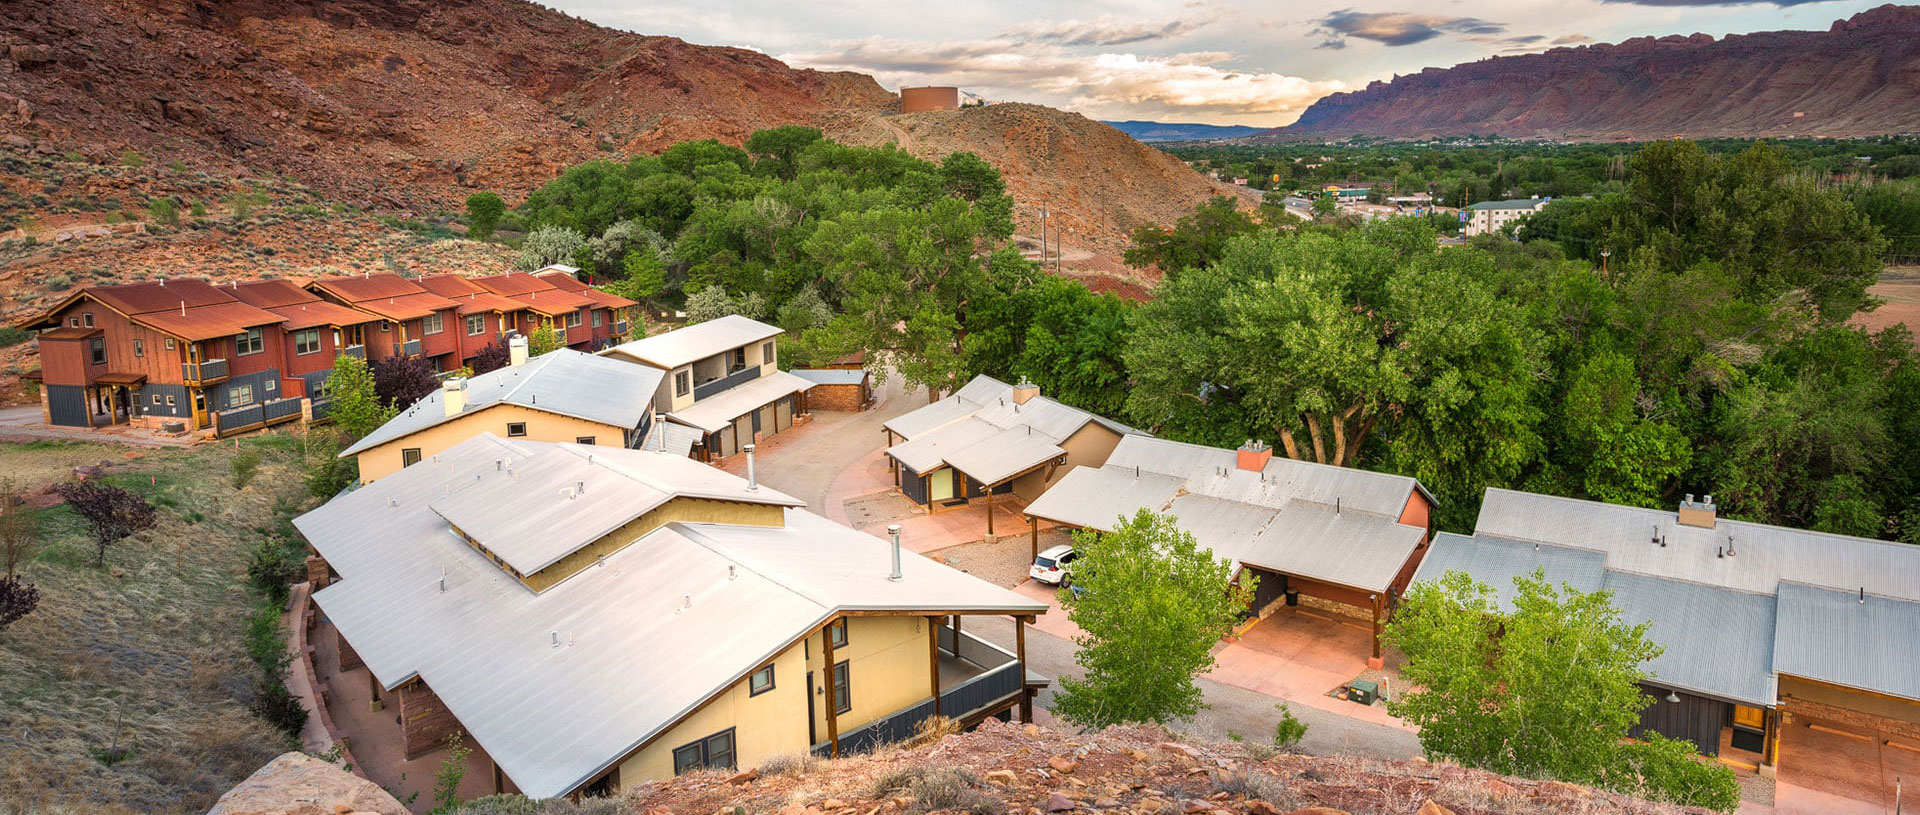 Aerial view of rows of the triangular roofs of townhouse units on Moab Springs Ranch with tall green trees and grasslands, and a rural road leading into the property.